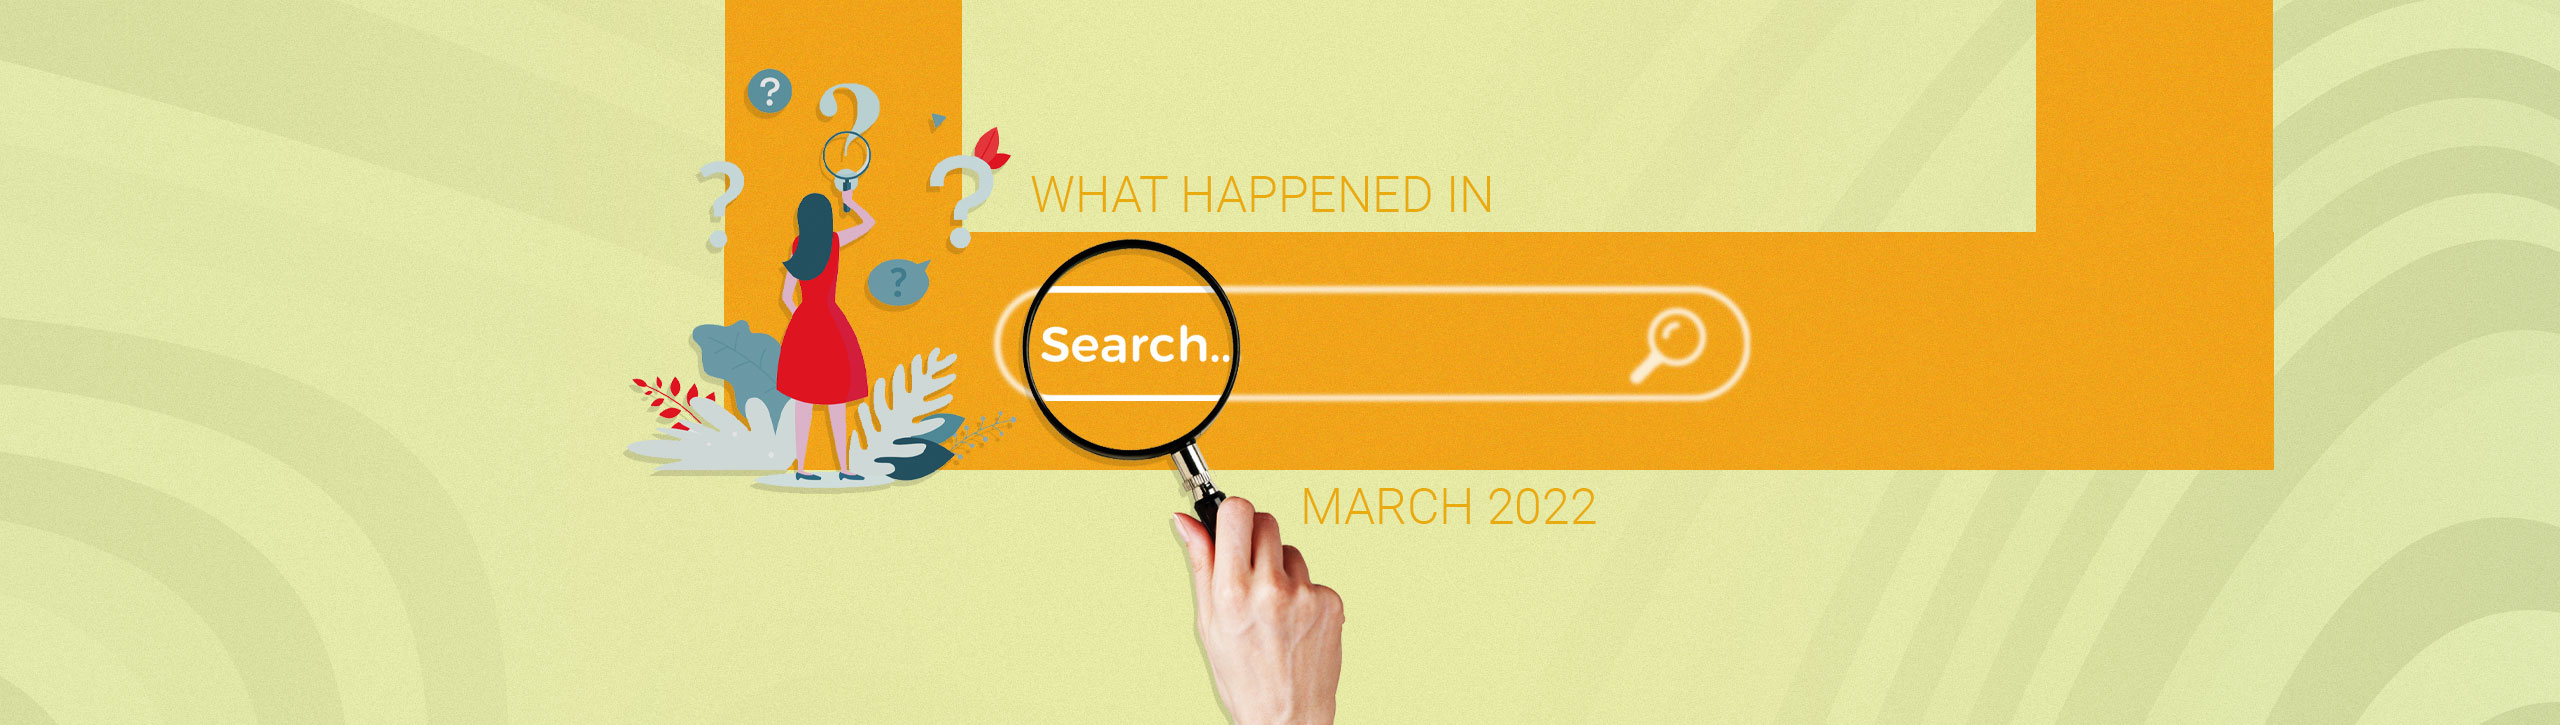 Google Search Updates – March ‘22 Changes